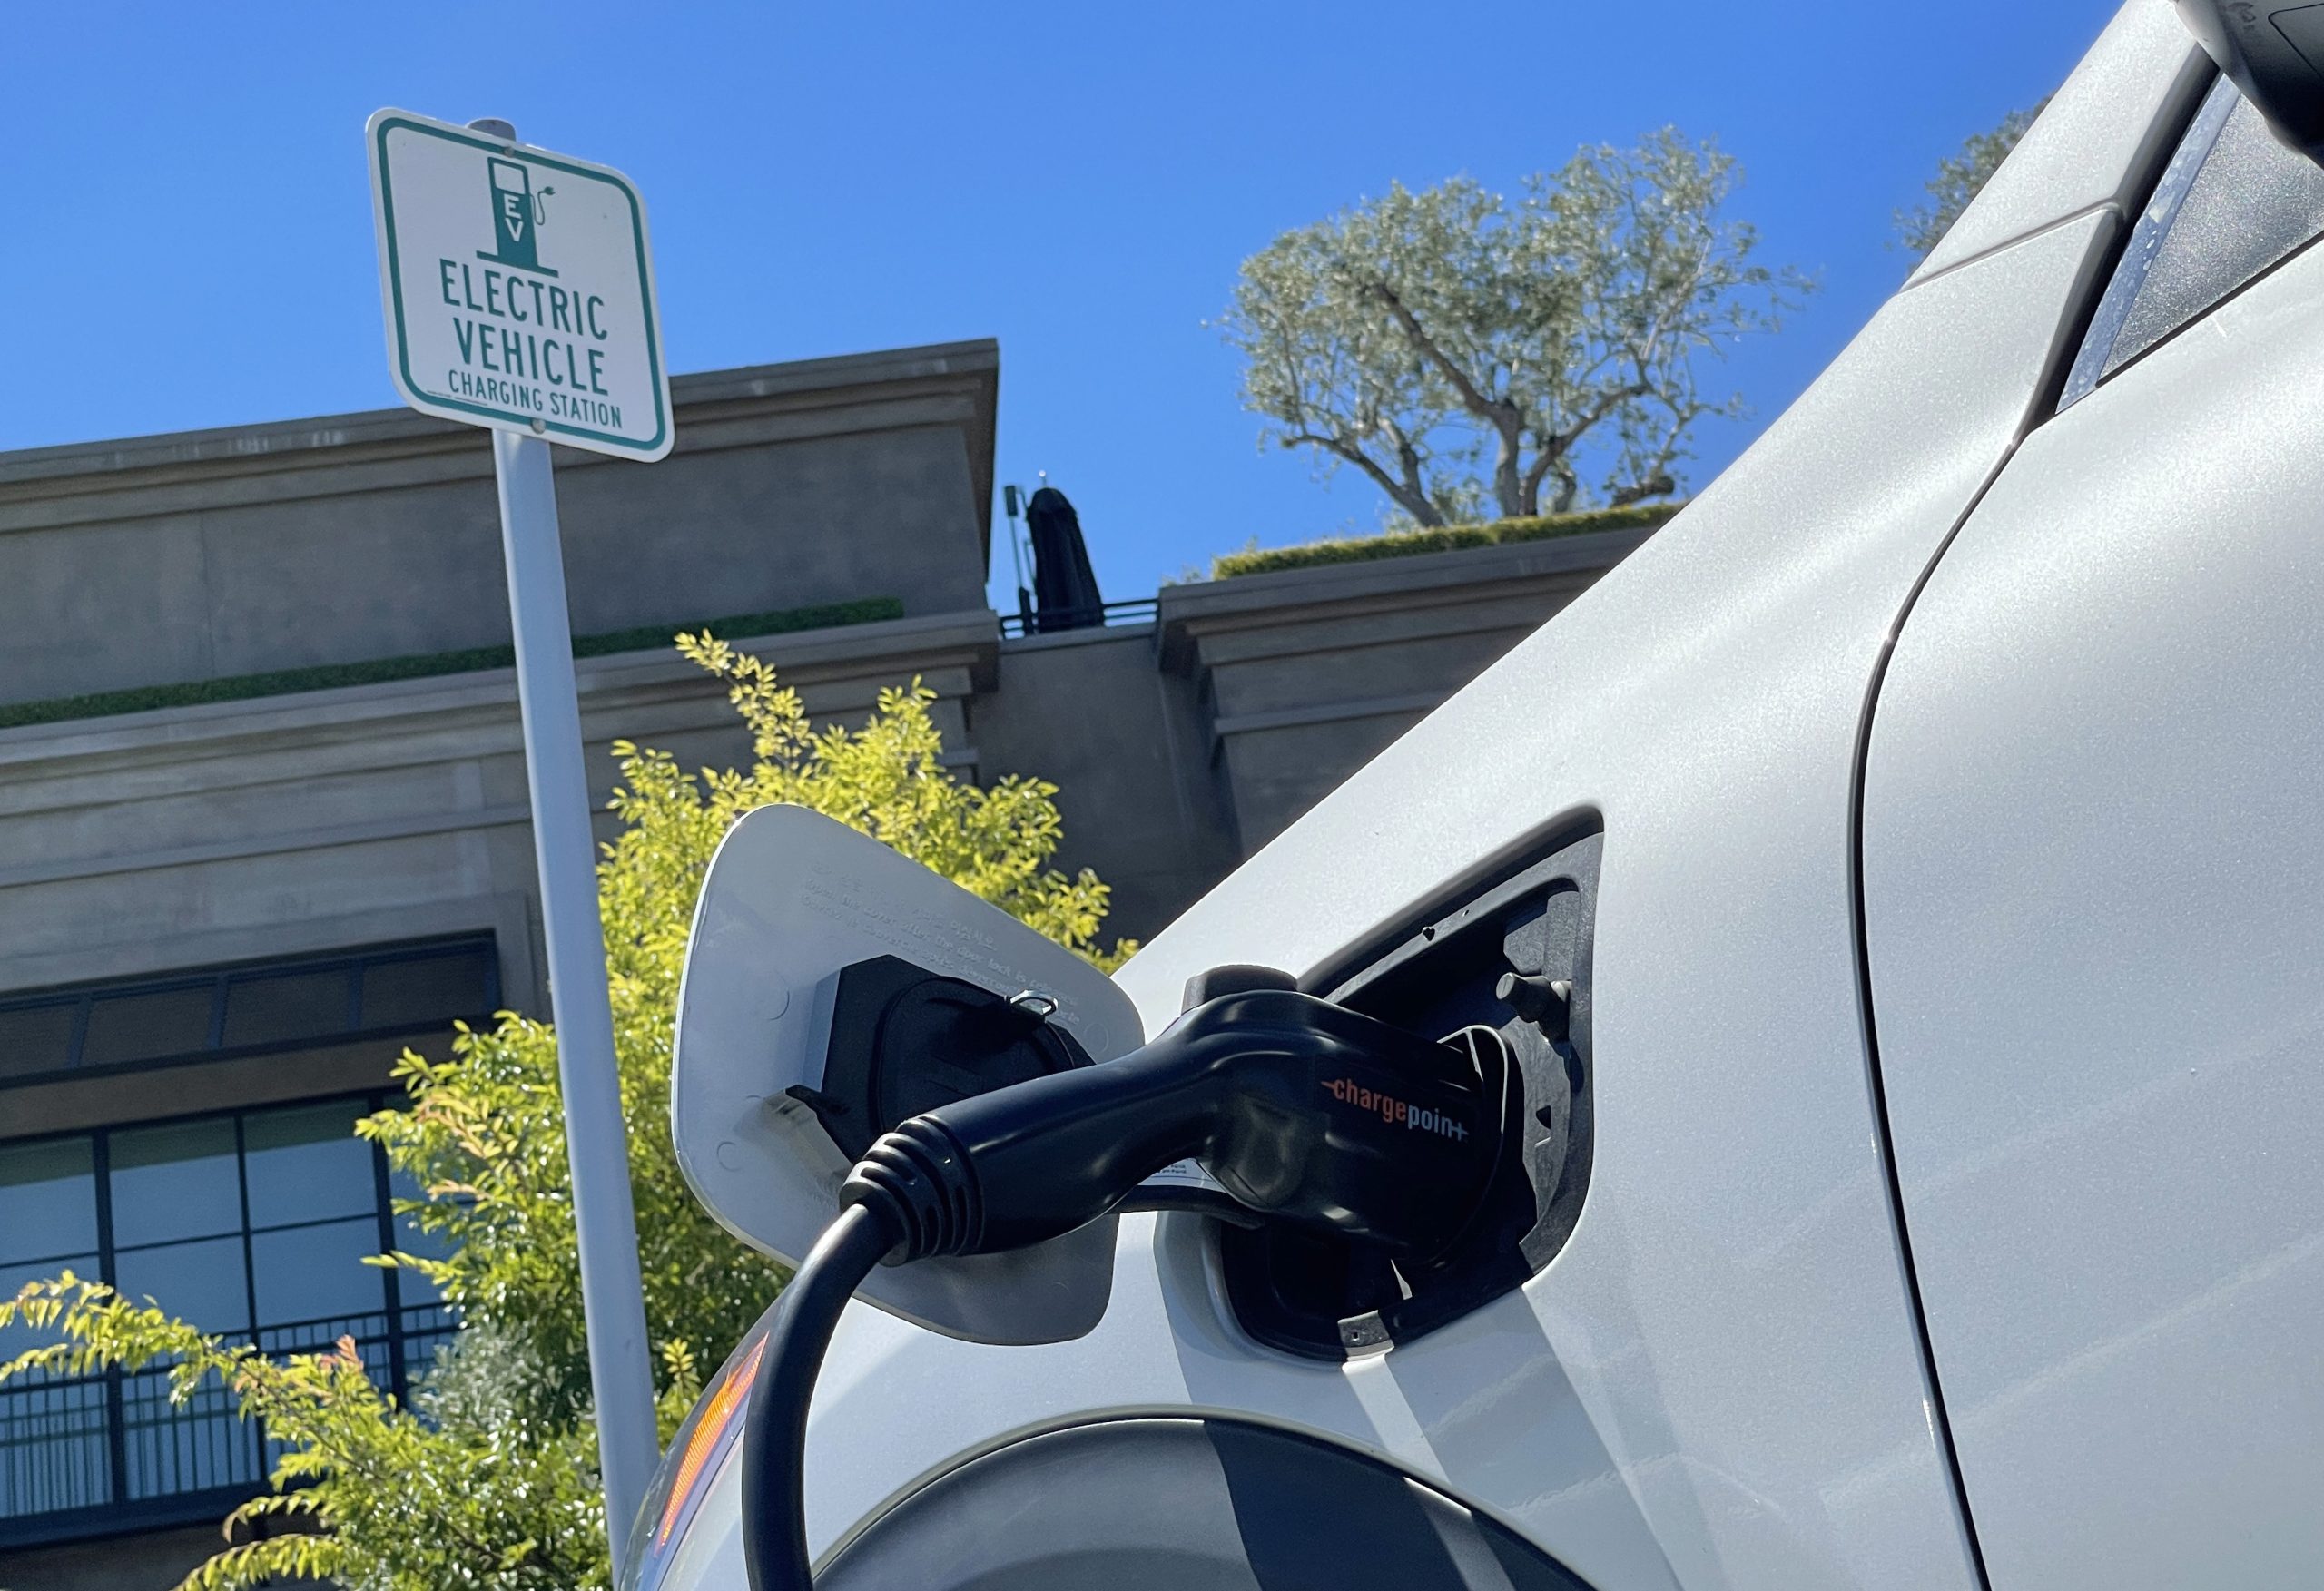 Treasury guidance on electric vehicle tax credit due next week